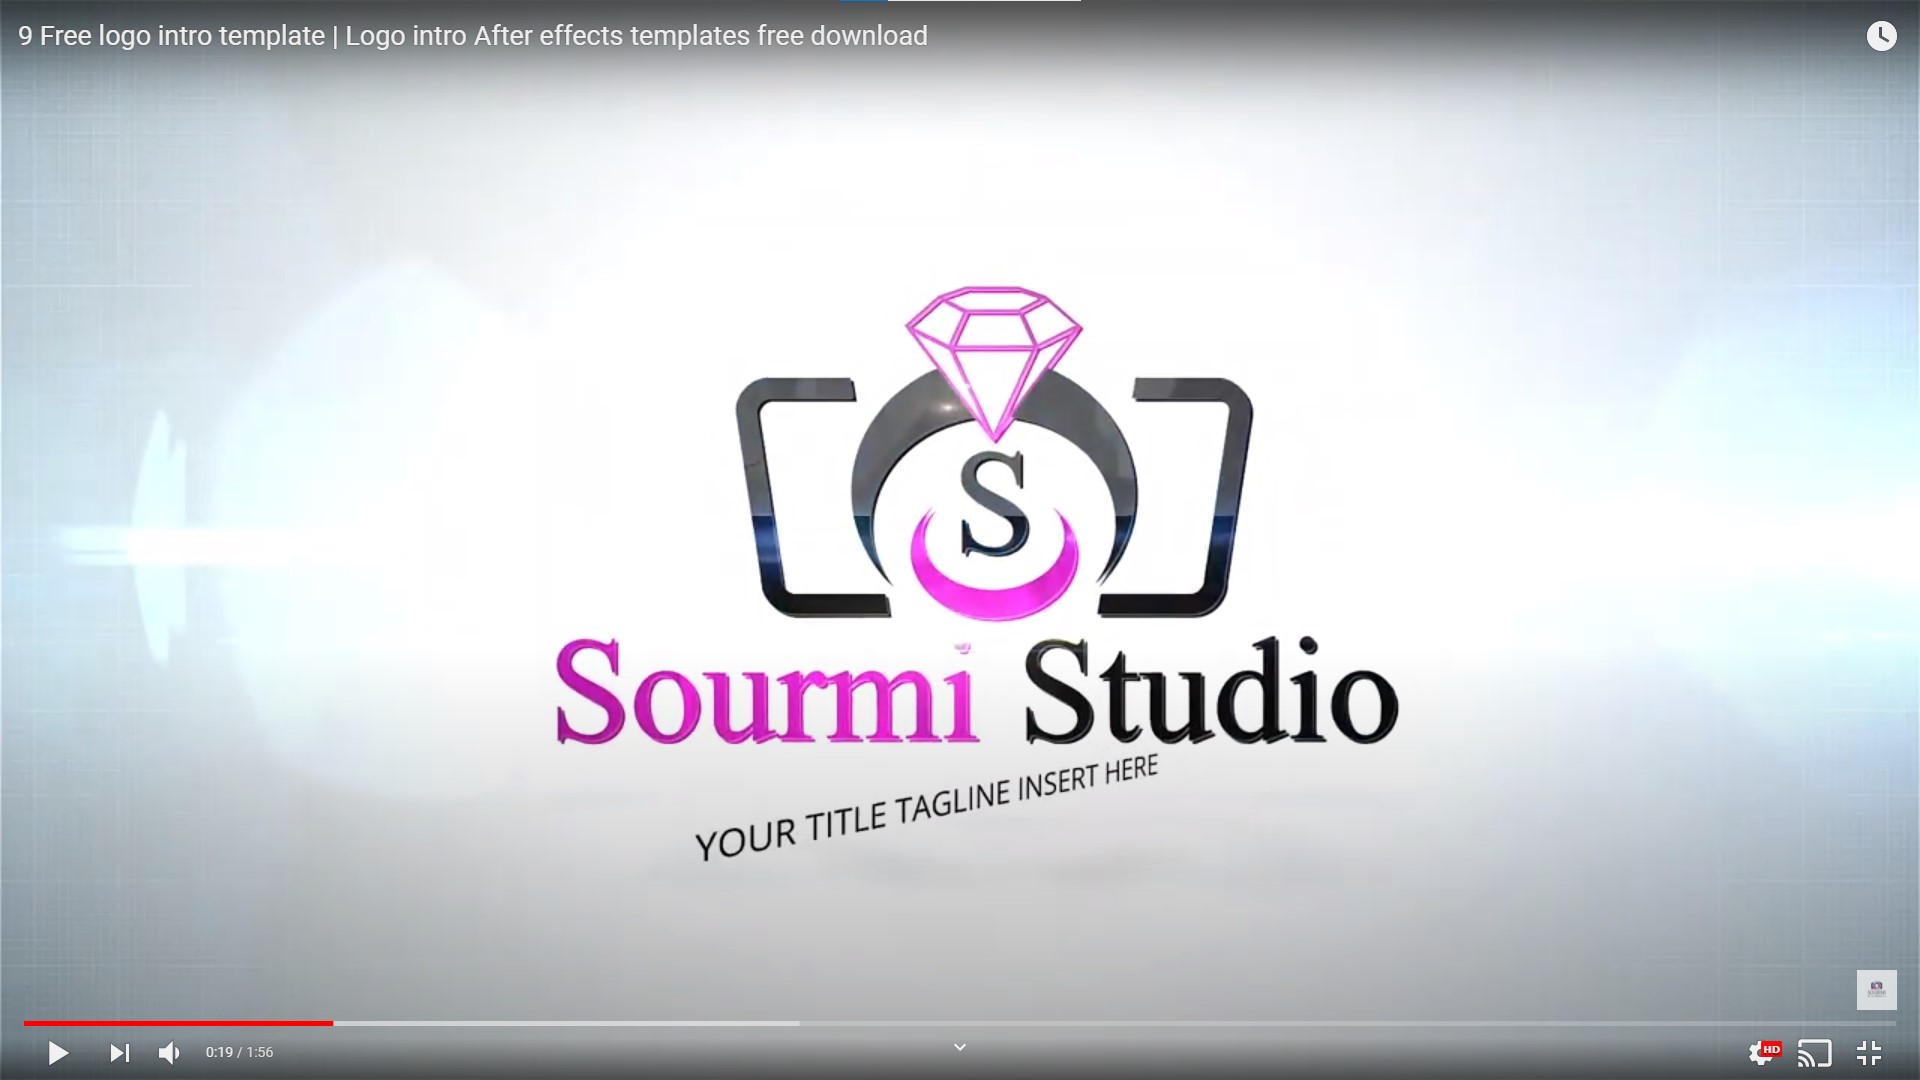 after-effects-free-logo-intro-templates-archives-free-online